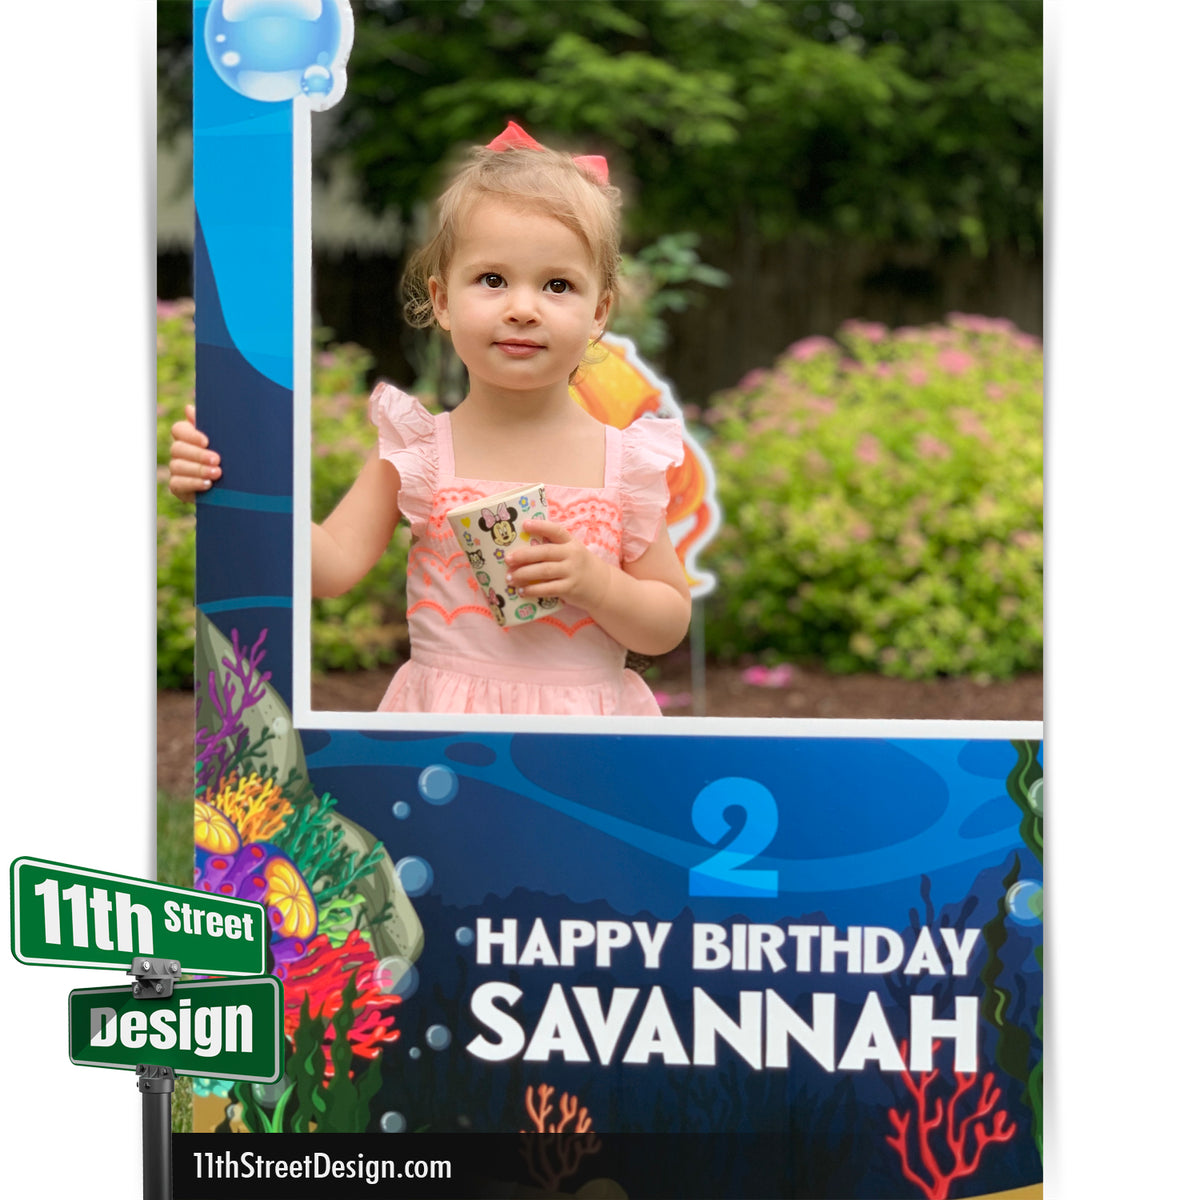 Personalized Mermaid Theme Birthday Party Decorations, Yard Card Lawn Signs With Photo Frame 0002